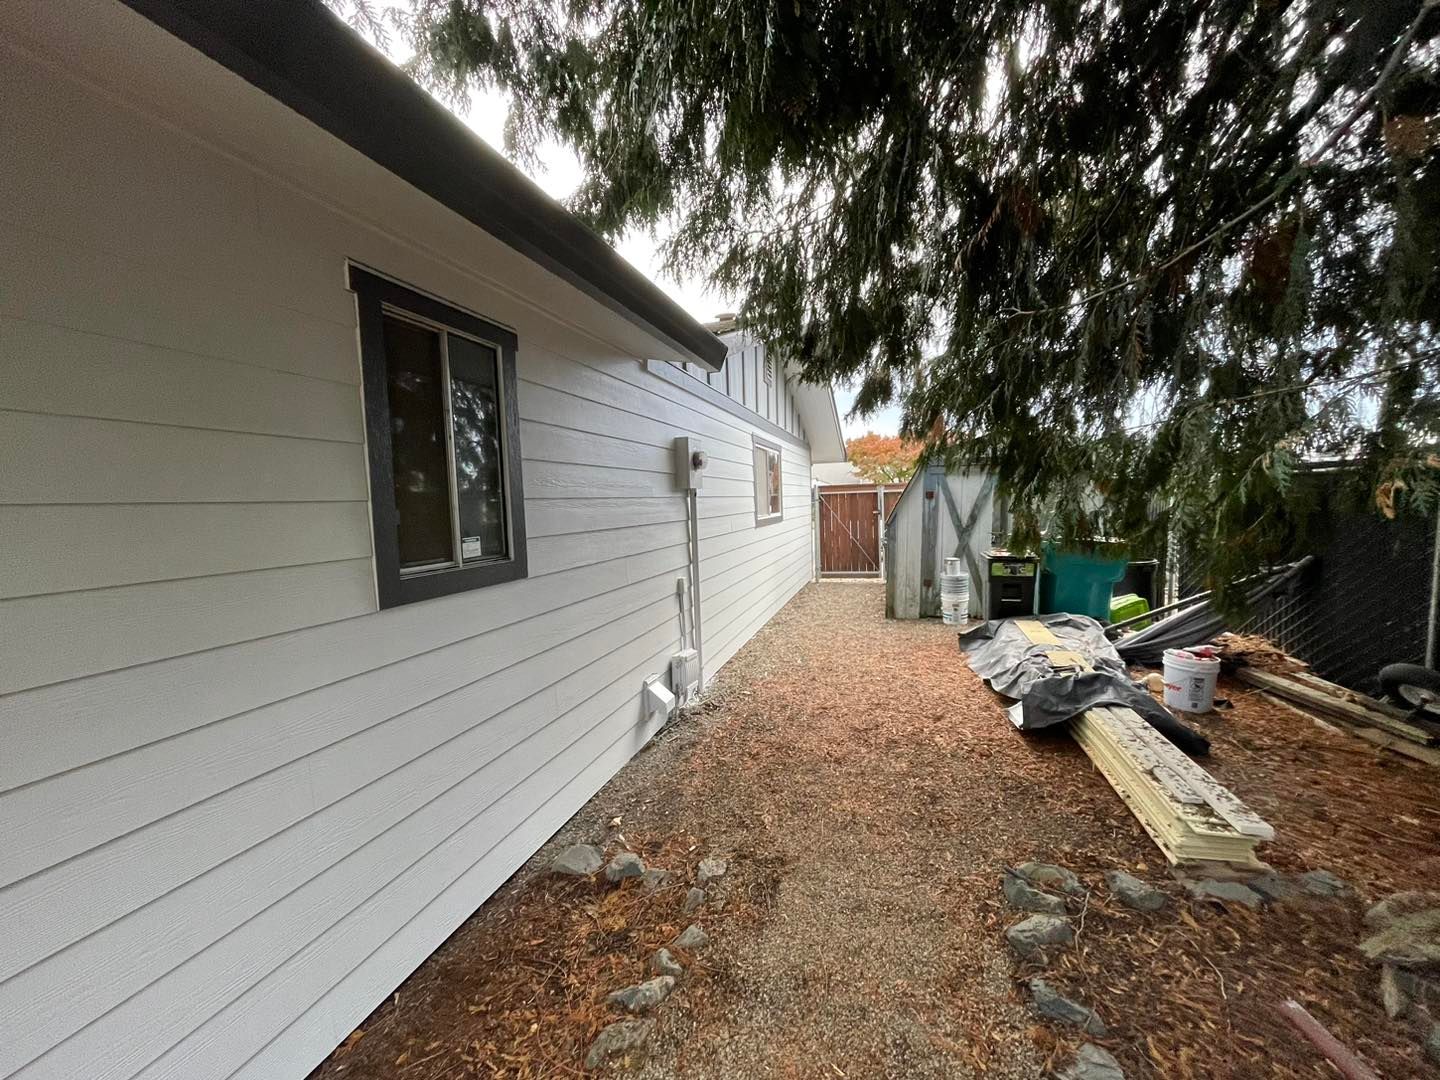 Exterior Renovations for 3SK Construction, LLC in Vancouver, WA